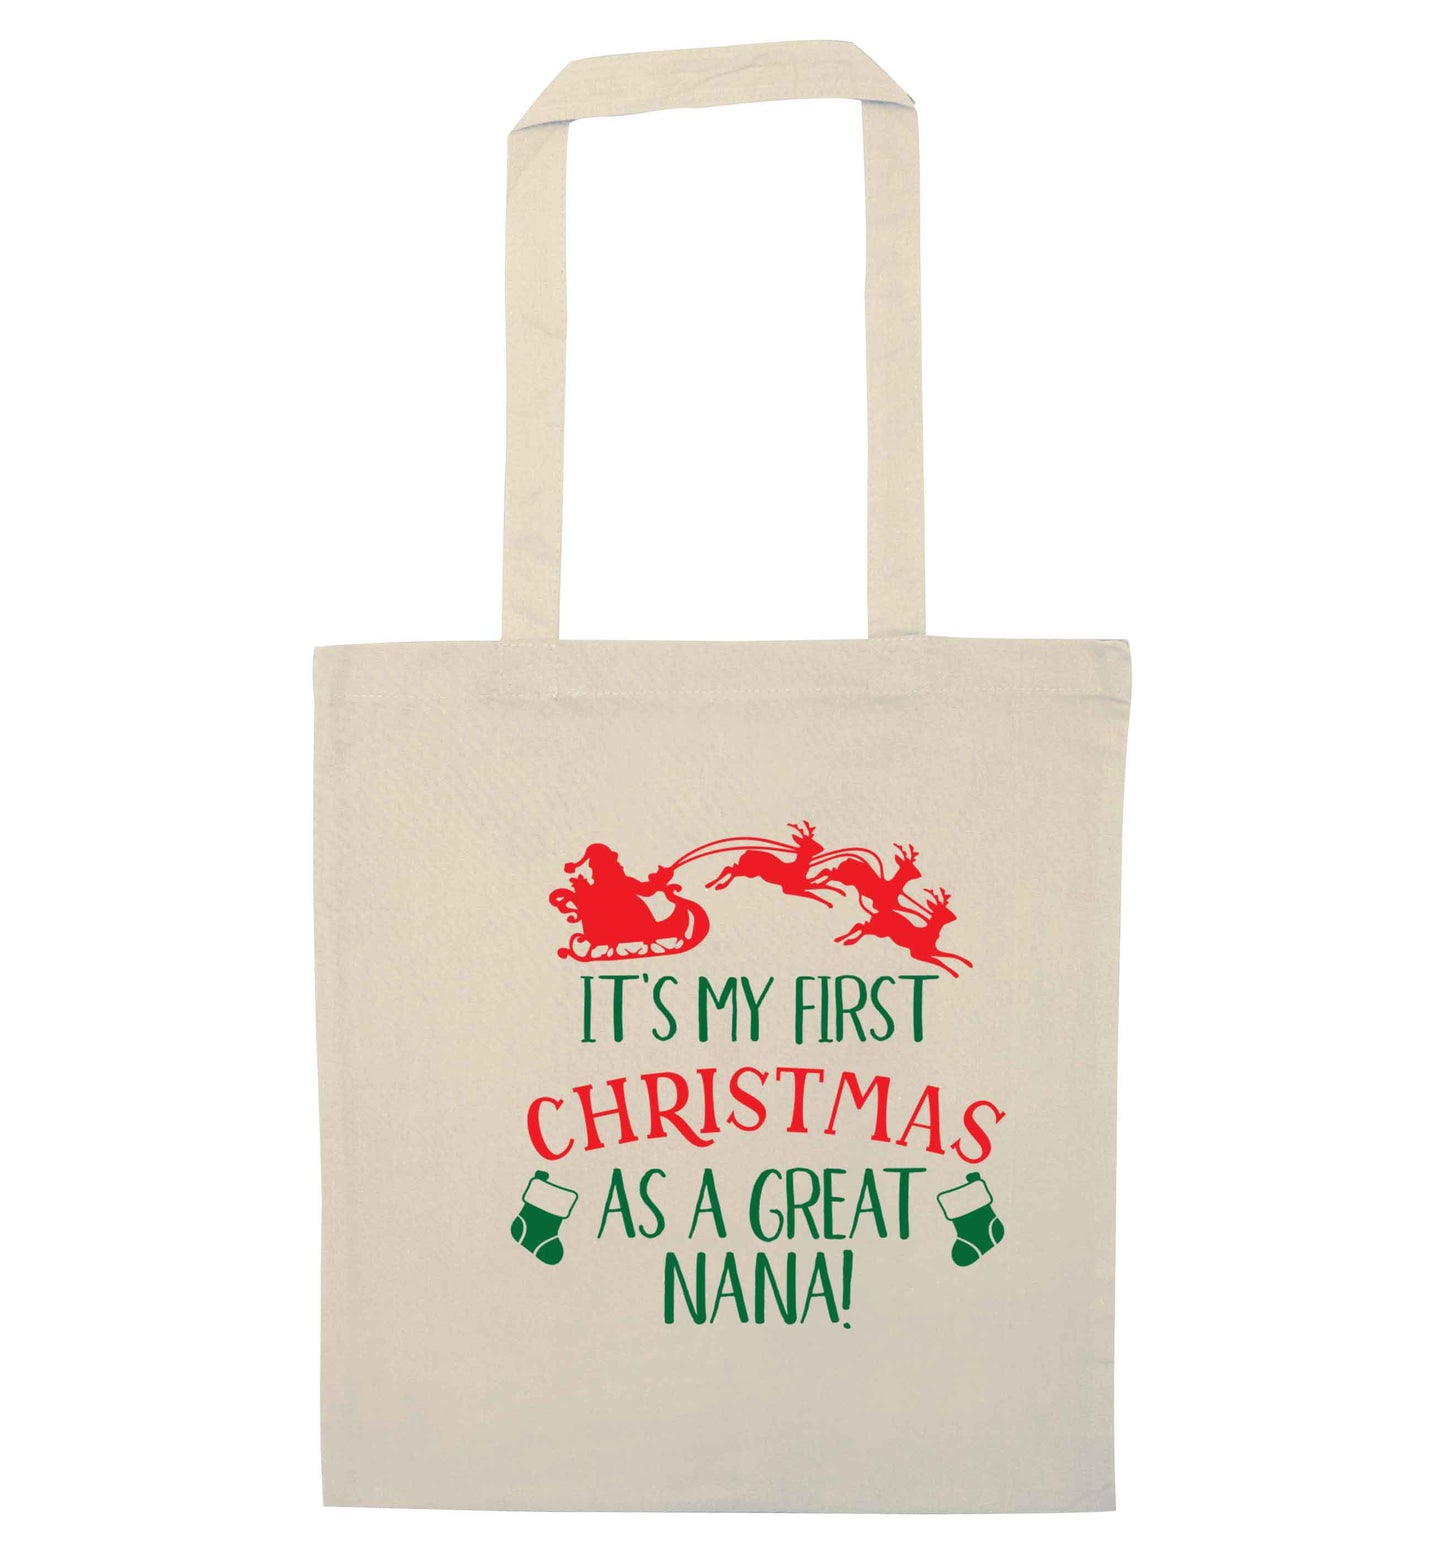 It's my first Christmas as a great nana! natural tote bag